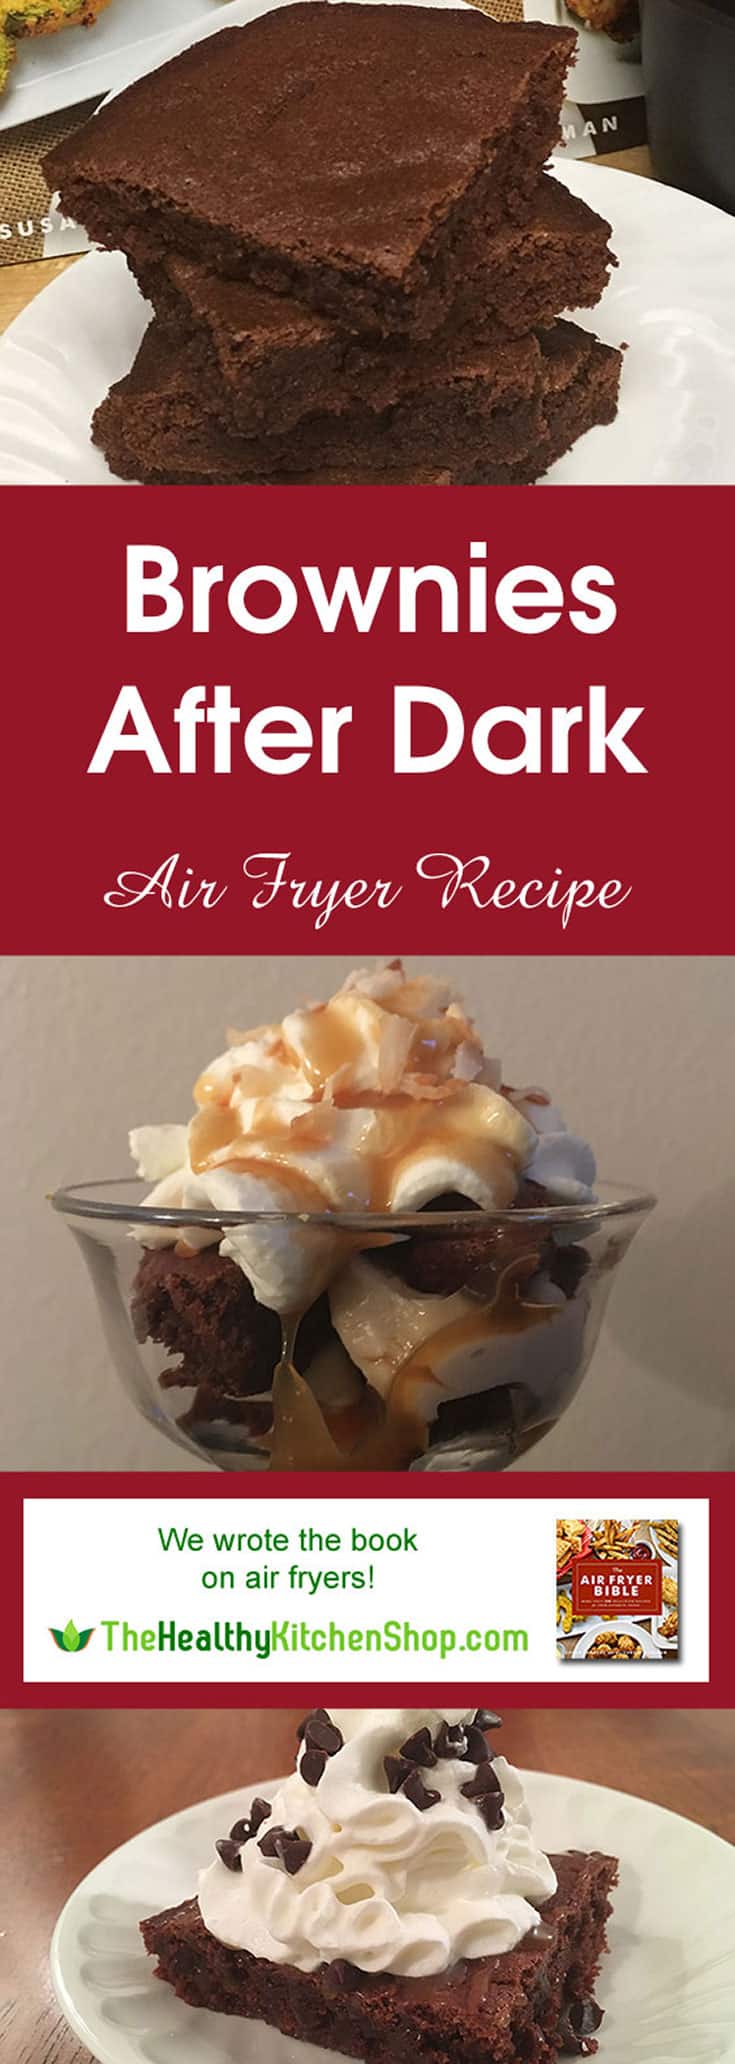 Air Fryer Recipe - Brownies After Dark from The Air Fryer Bible, TheHealthyKitchenShop.com